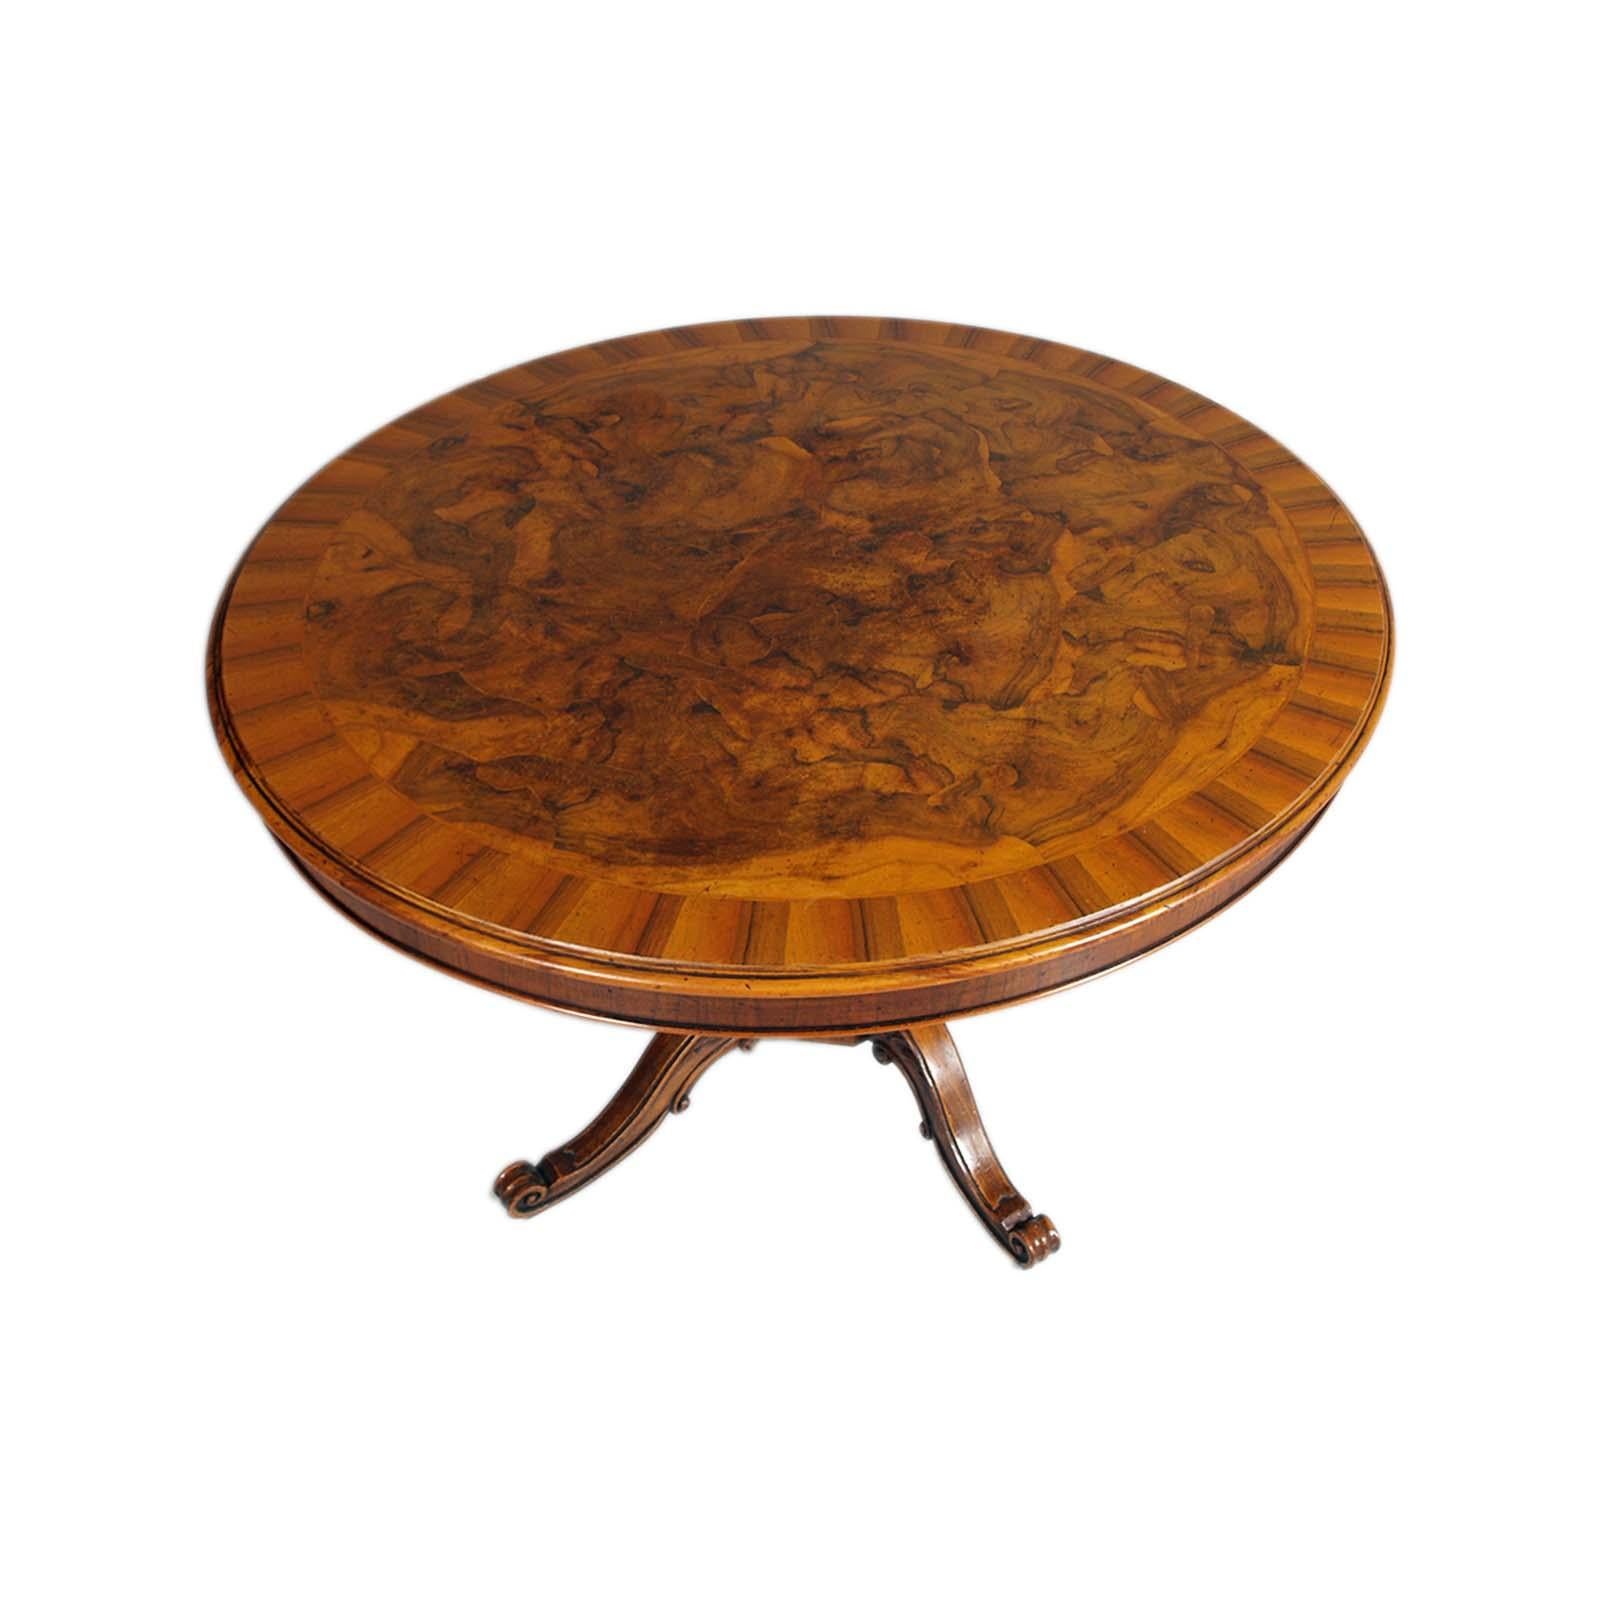 Elegant round baroque table from the early 1900s with top in Ferrarese walnut root and central inlay polished with shellac and wax

The table is a 1900s production of the famous elegant Ferrara tables from the 1700s in use in that famous Renaissance